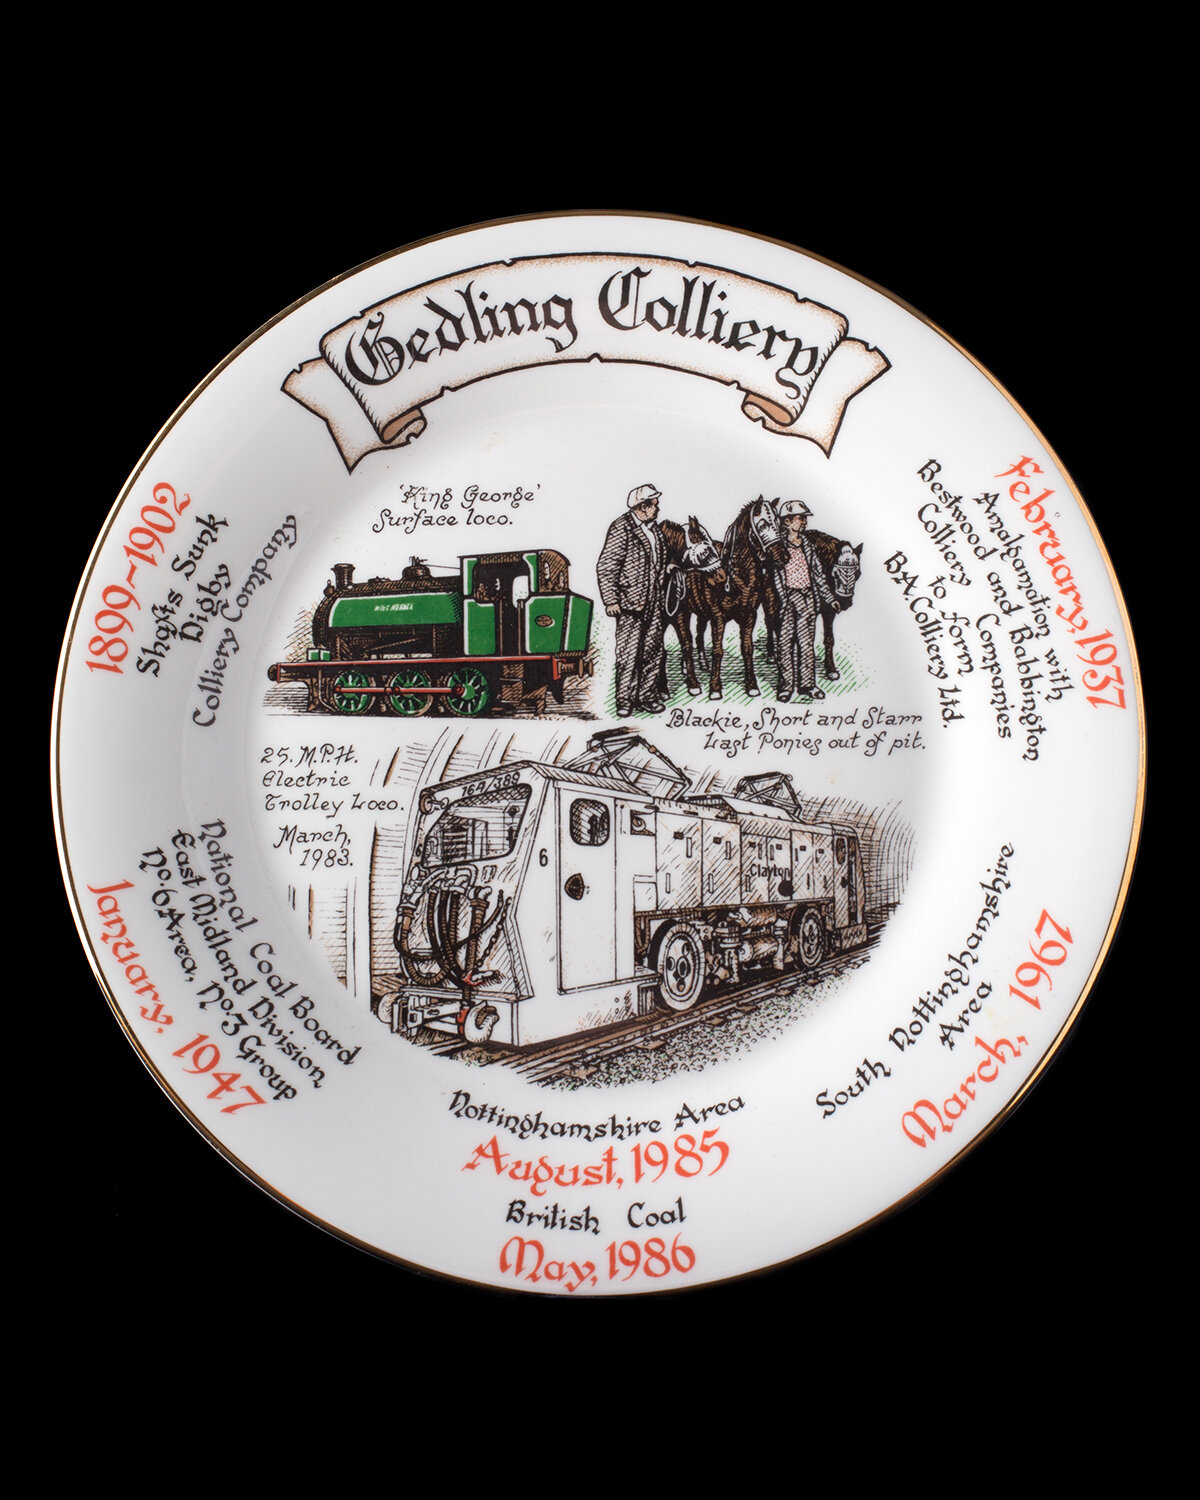 Gedling Colliery commemorative plate